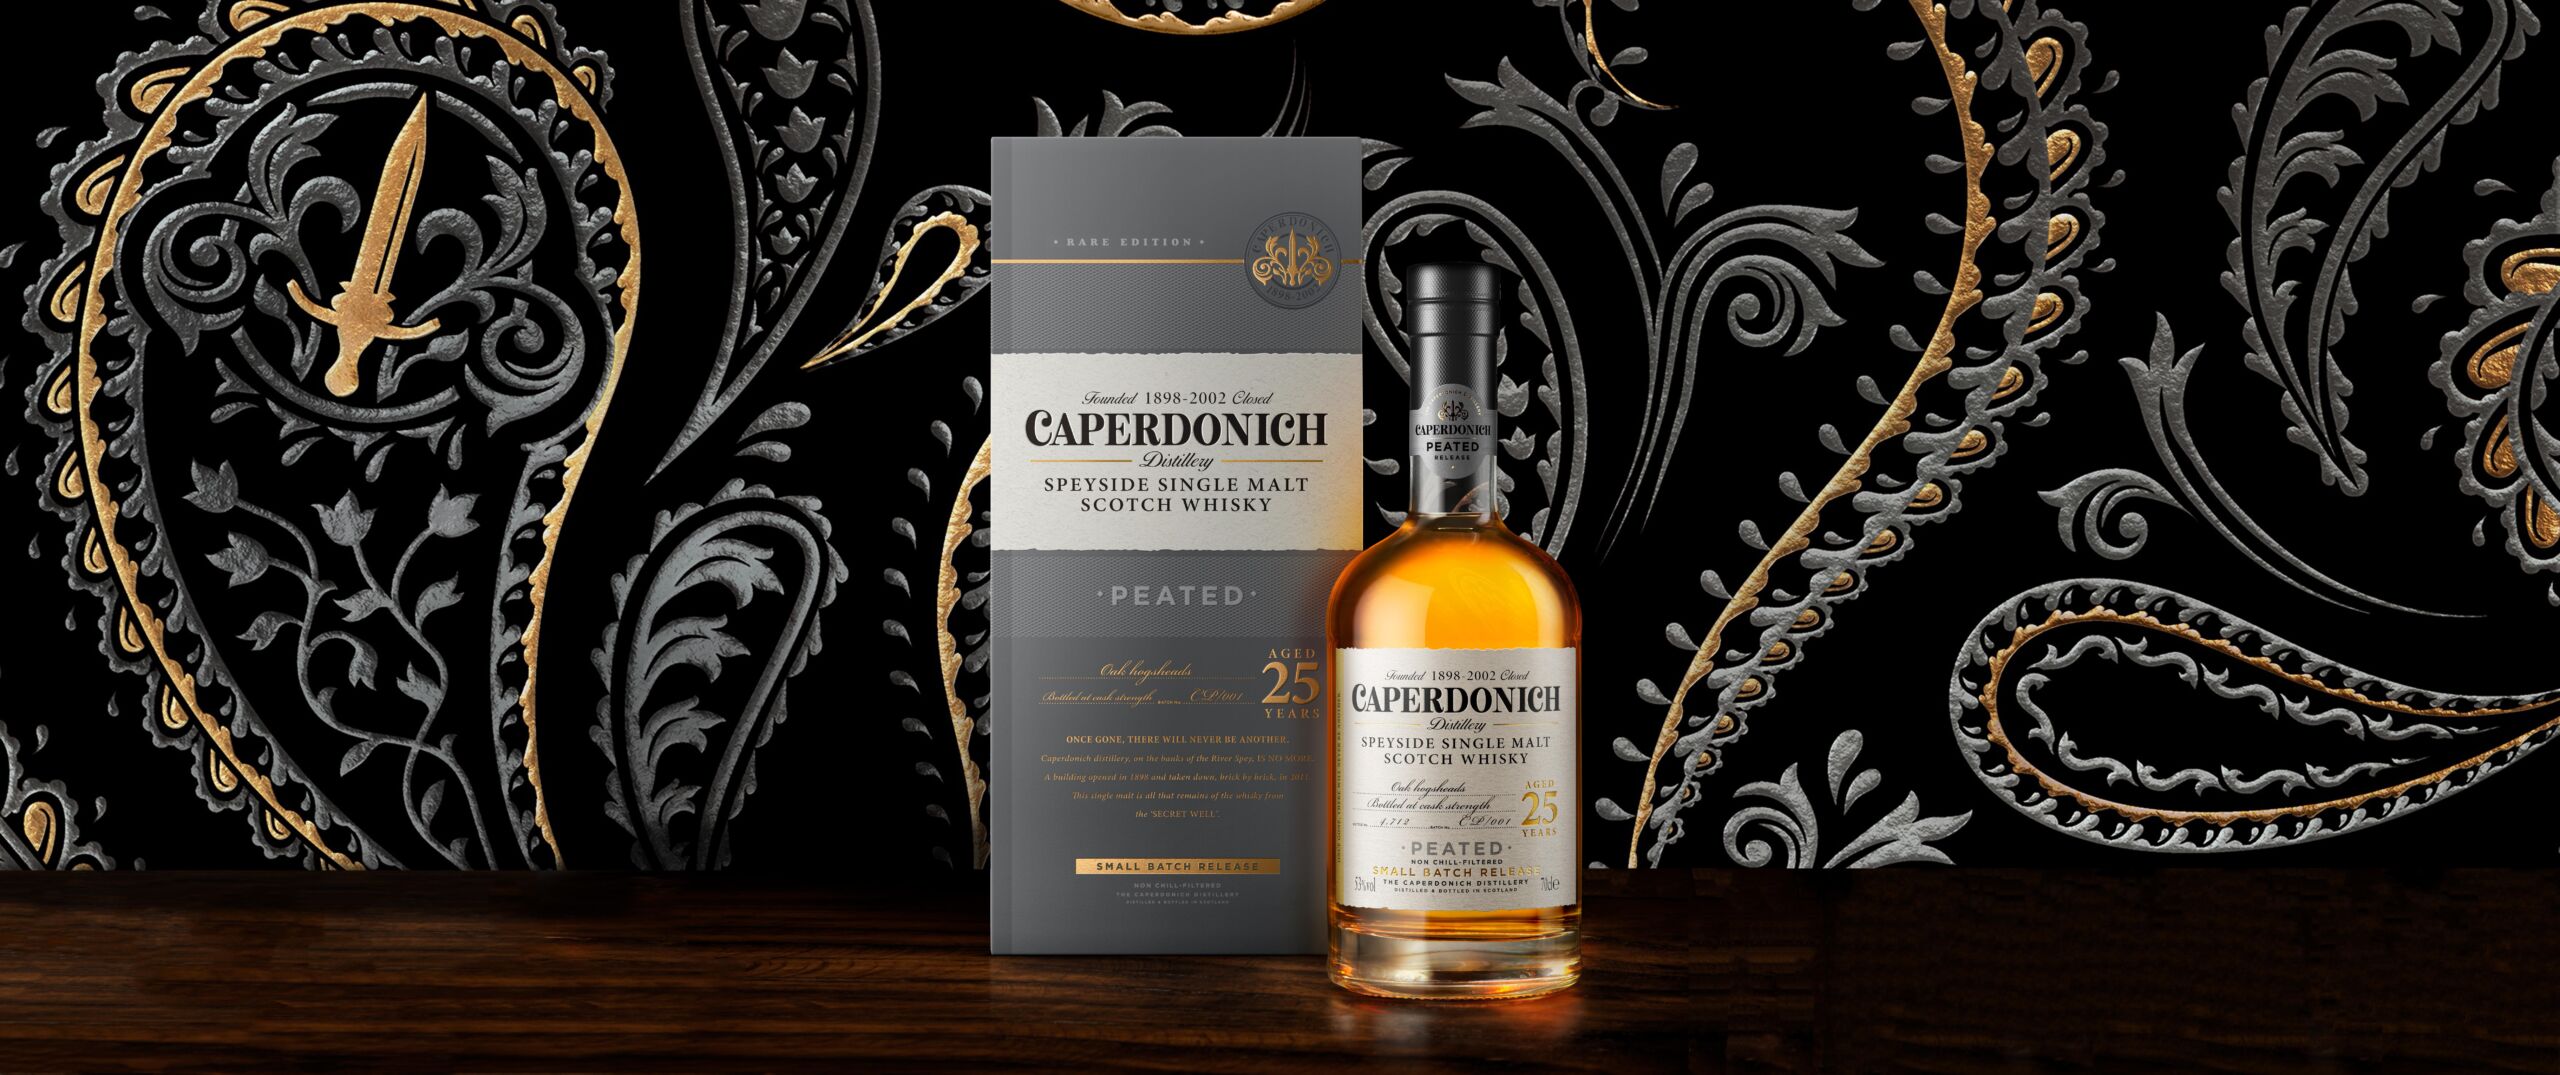 We tasted Caperdonich 25-Year-Old Peated, the last whisky of its